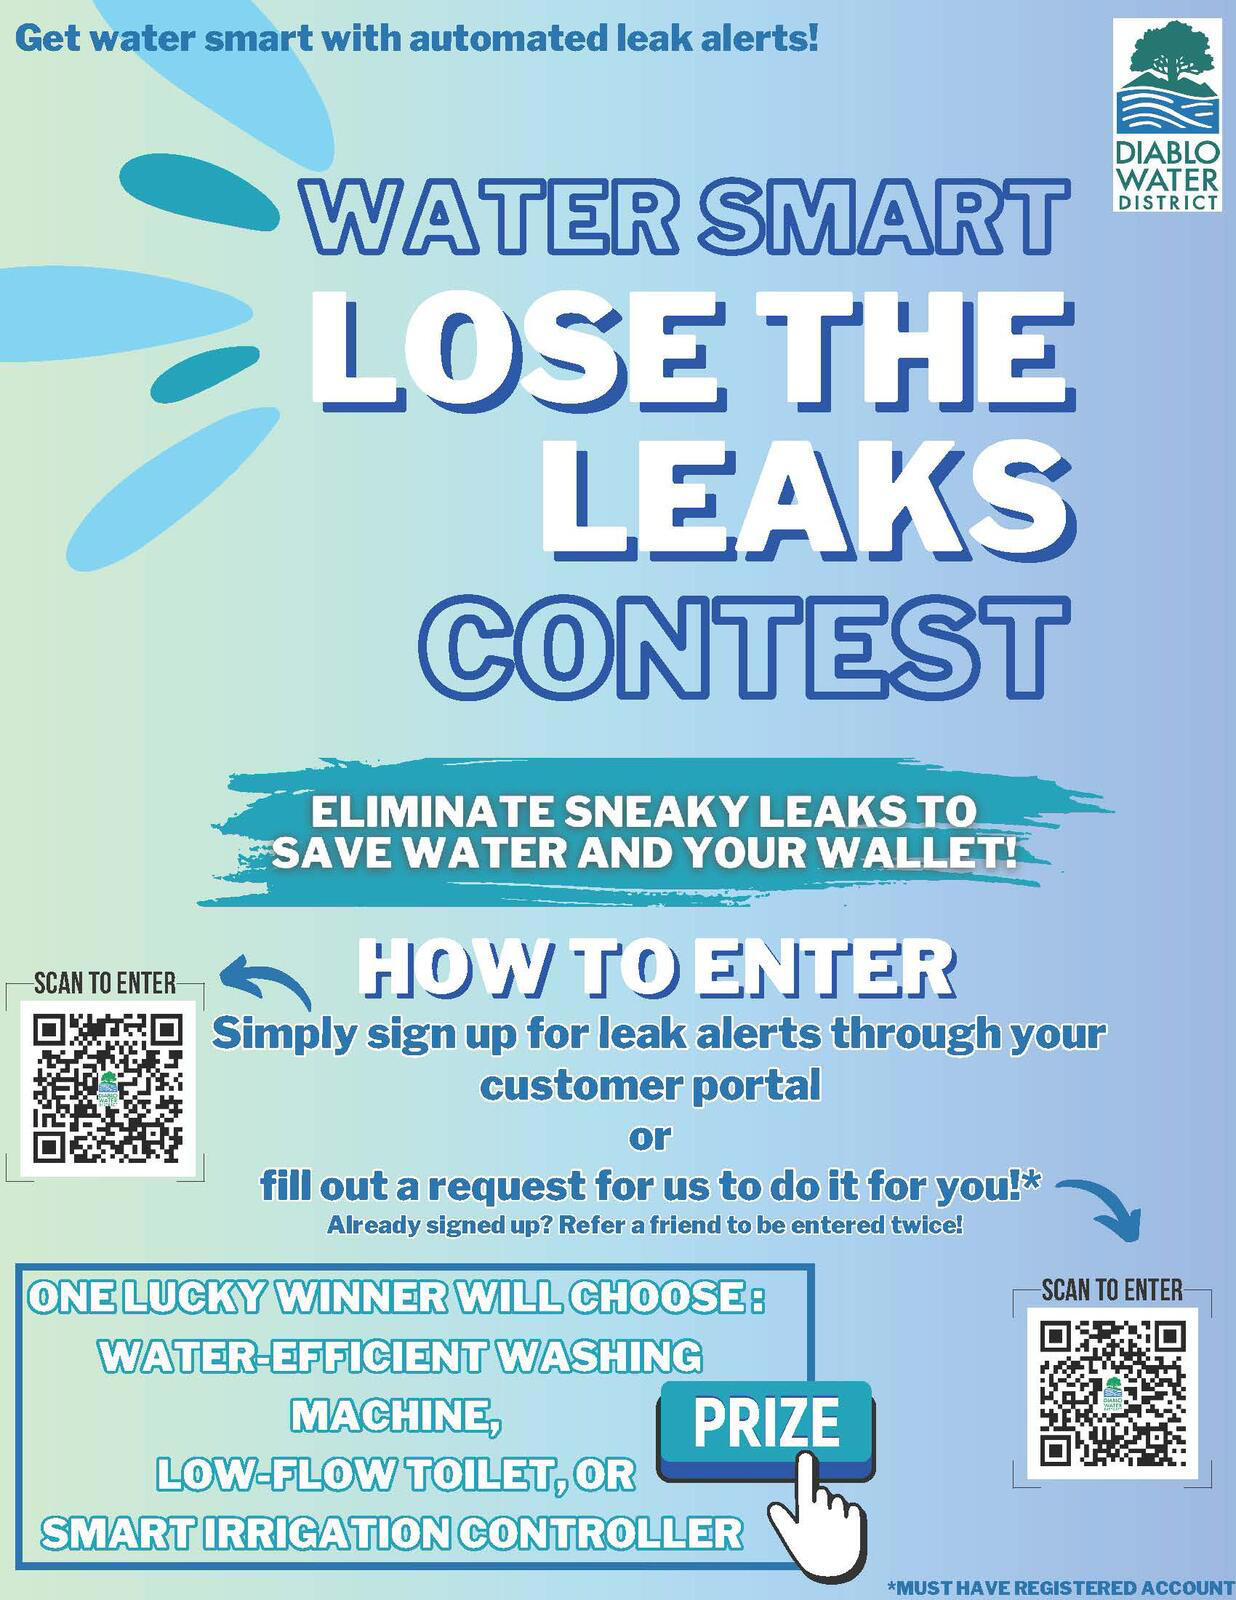 Our Friends At The Diablo Water District Are Hosting A Lose The Leaks 